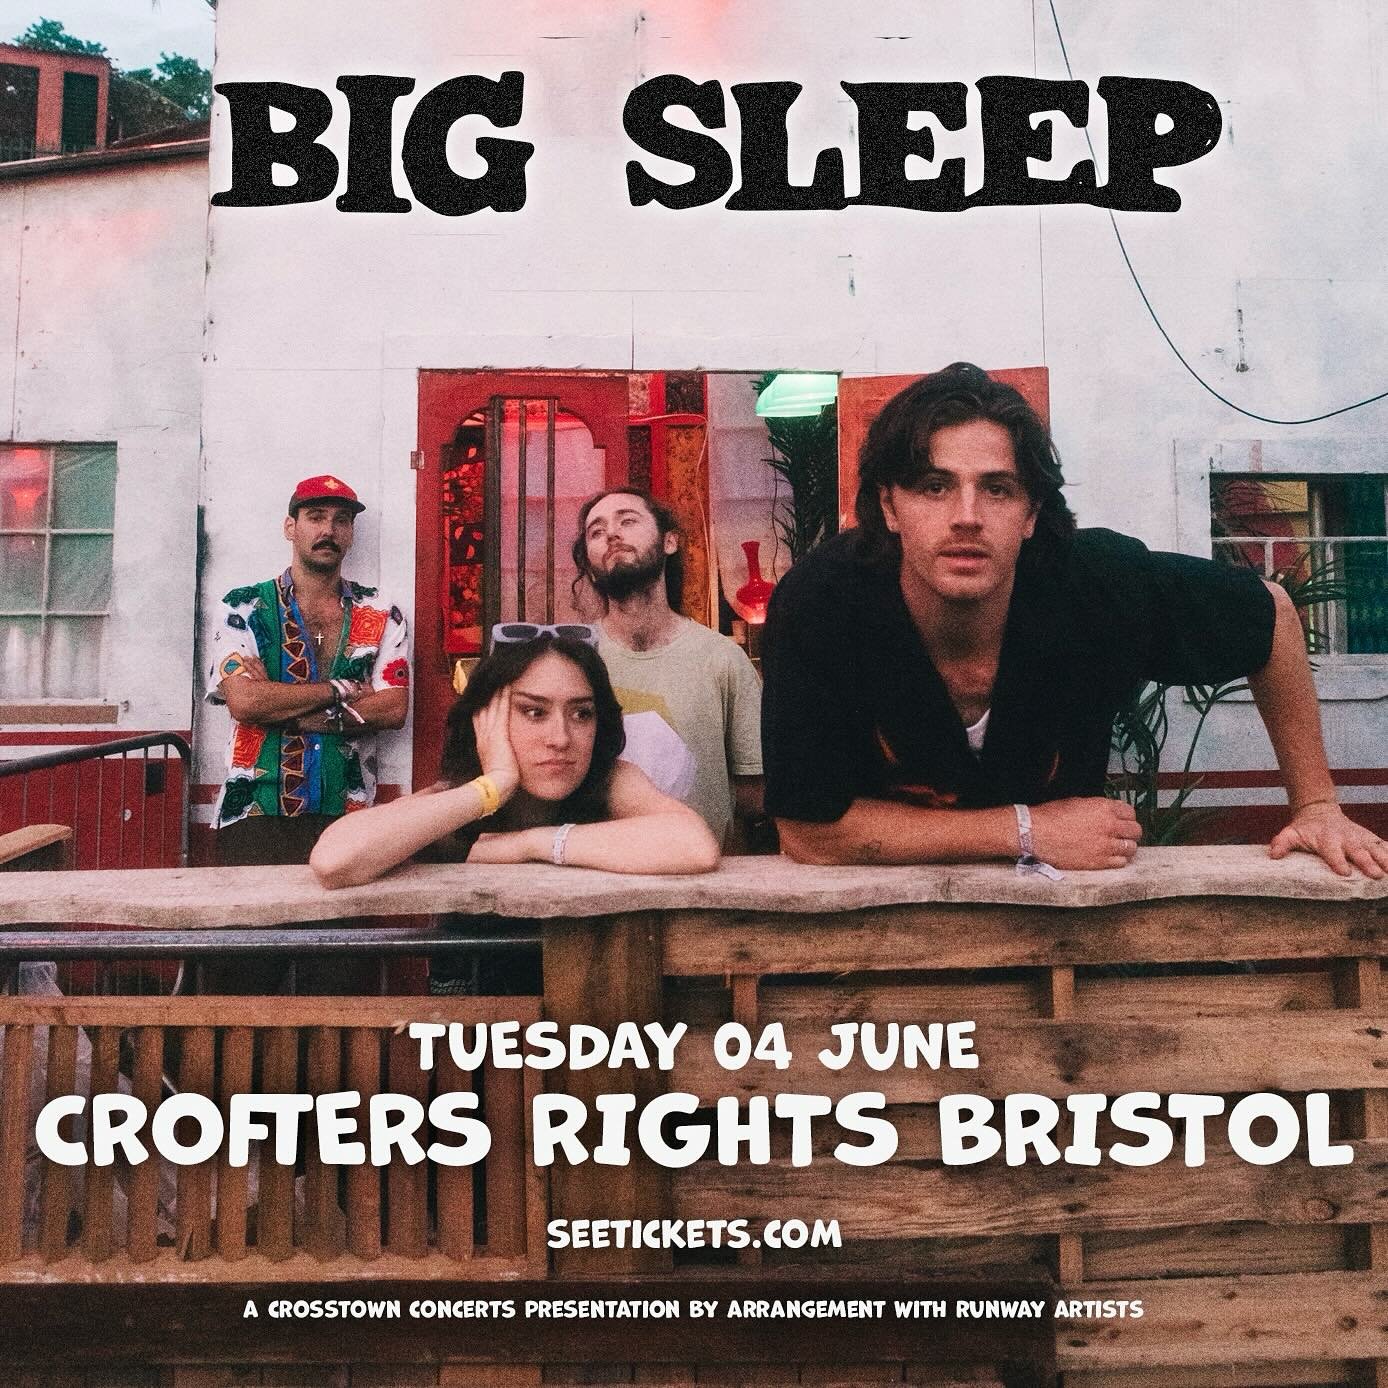 Dublin&rsquo;s @bigsleepmusic make their Bristol headline debut at @crofters_rights on Tuesday 4 June. 🎧 Give their latest single Two Cents a spin. Tickets go on sale this Wed at 10am 🌟